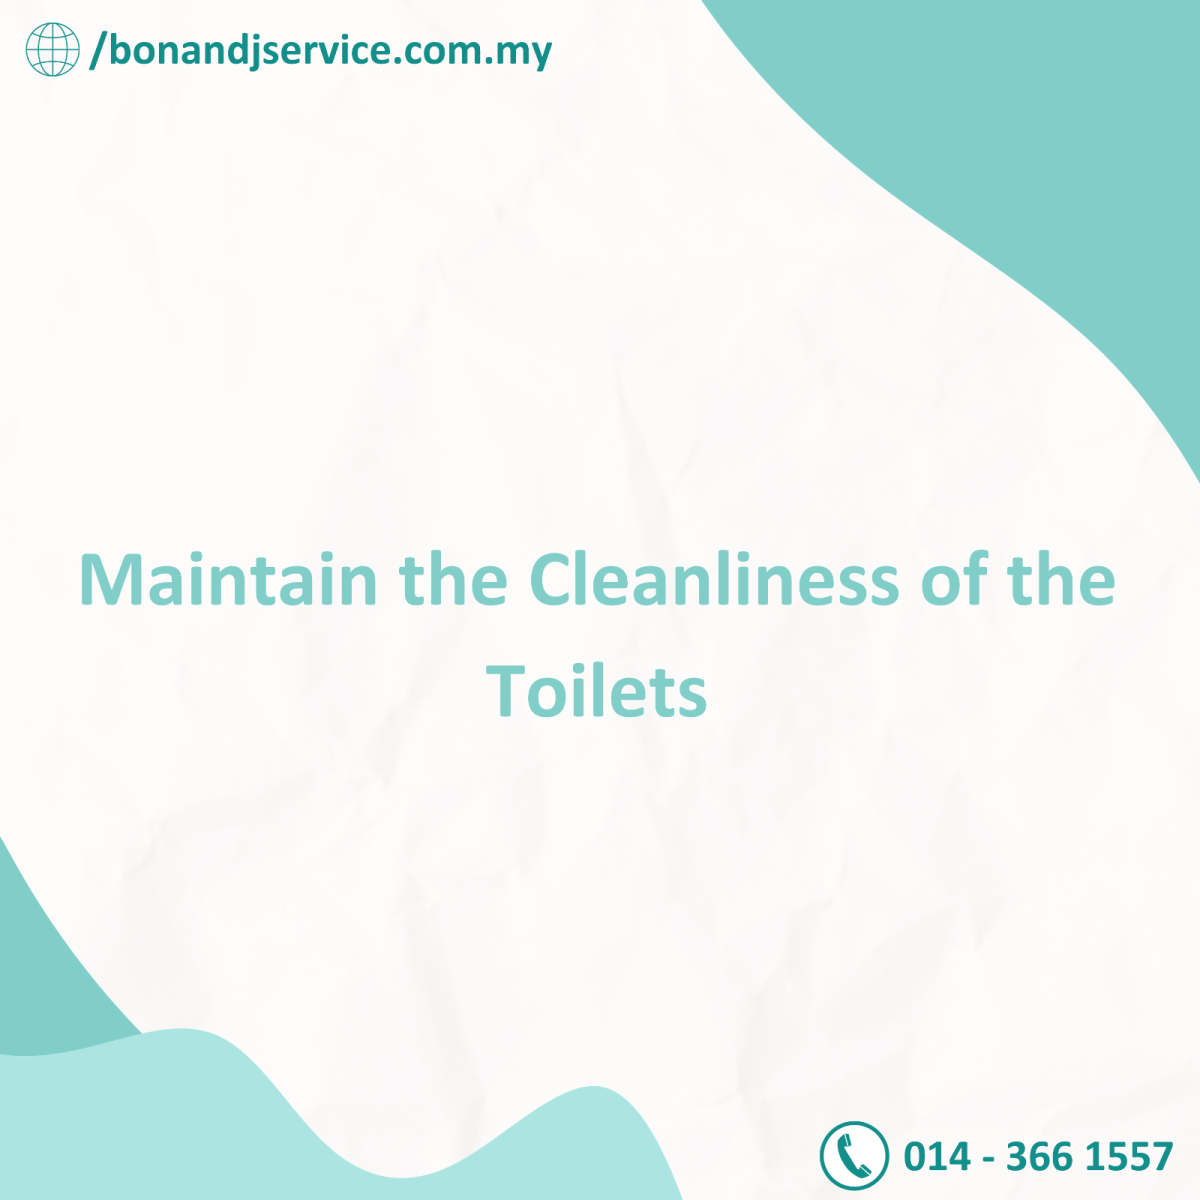 Maintain the cleanliness of the Toilets 